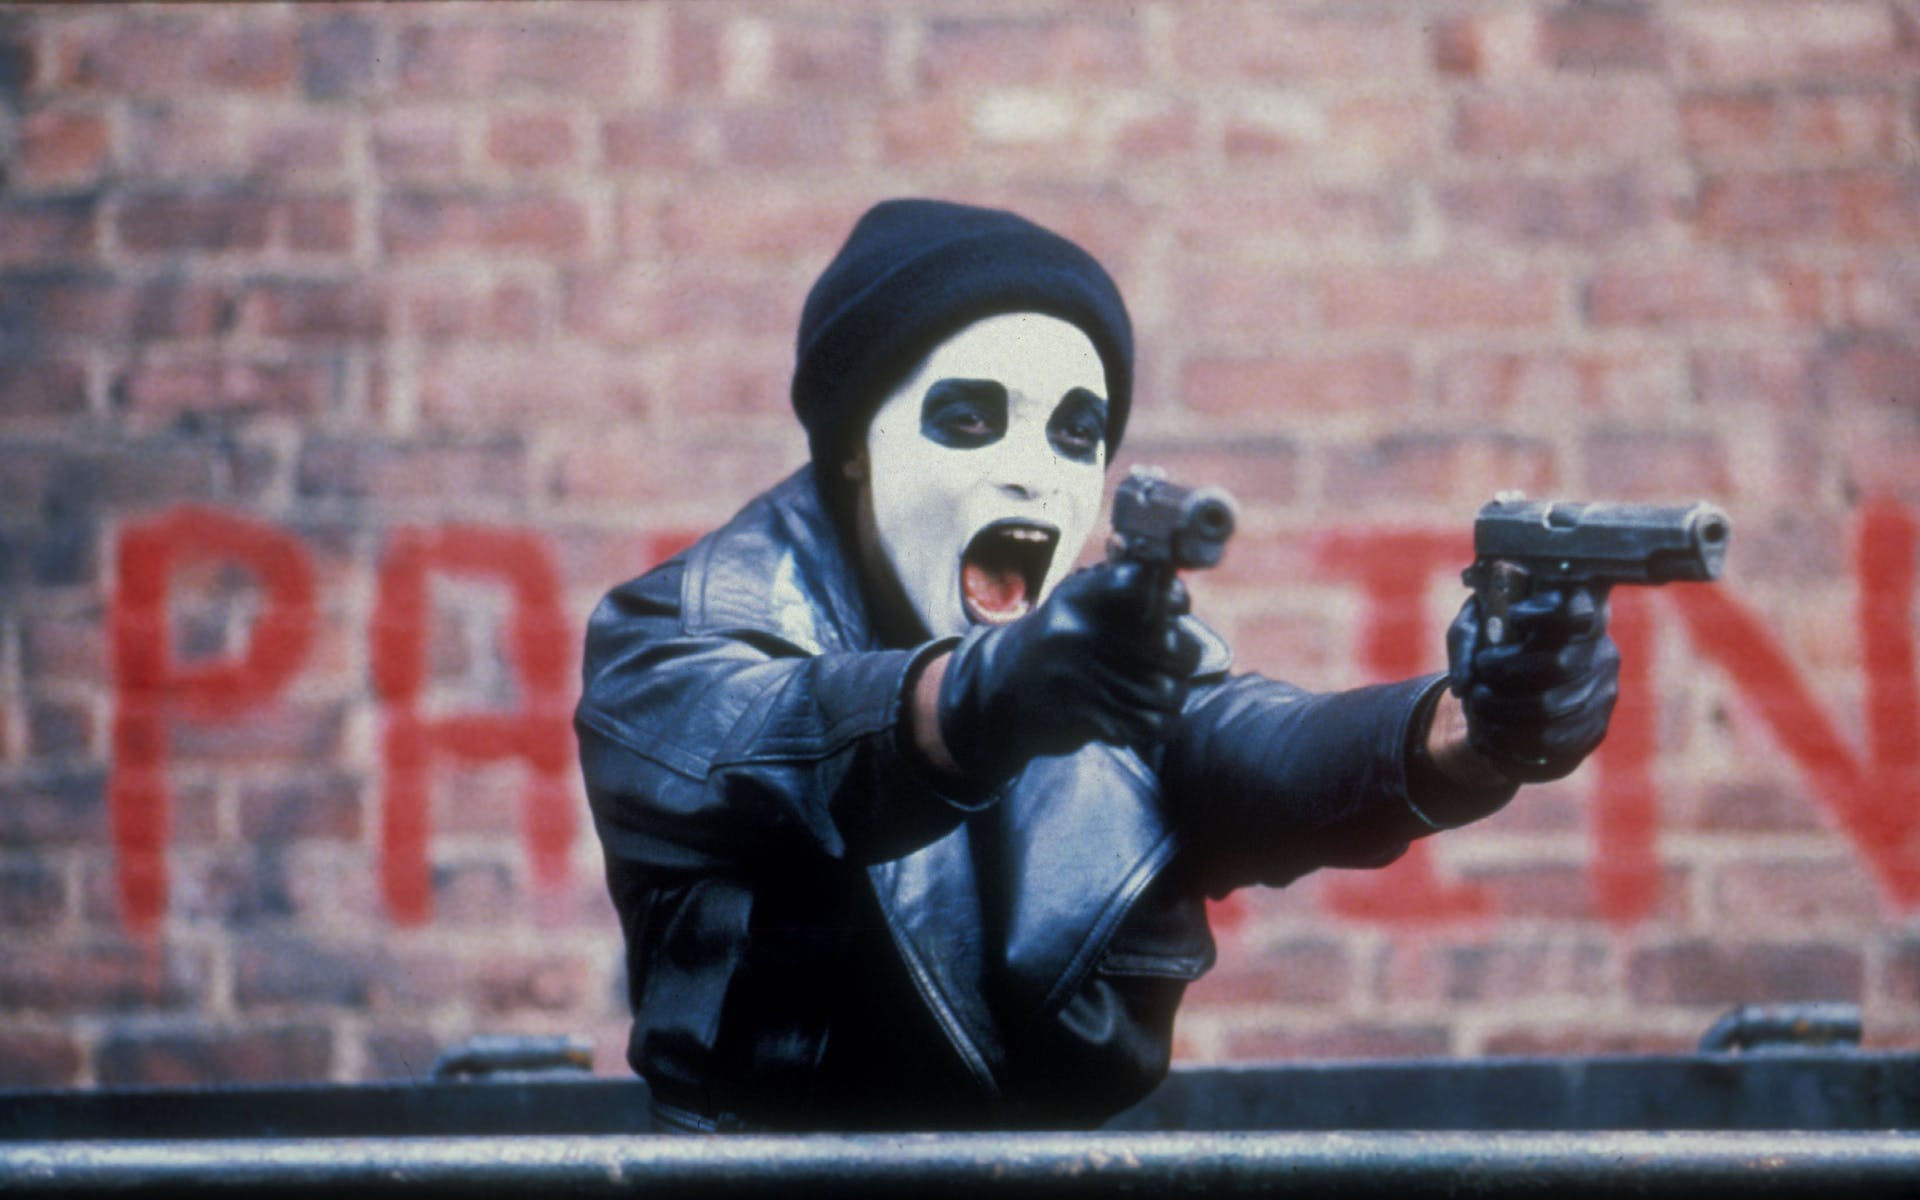 A man in a leather coat, stocking cap, and white and black face make up yells as he point guns in both hands at something off screen.